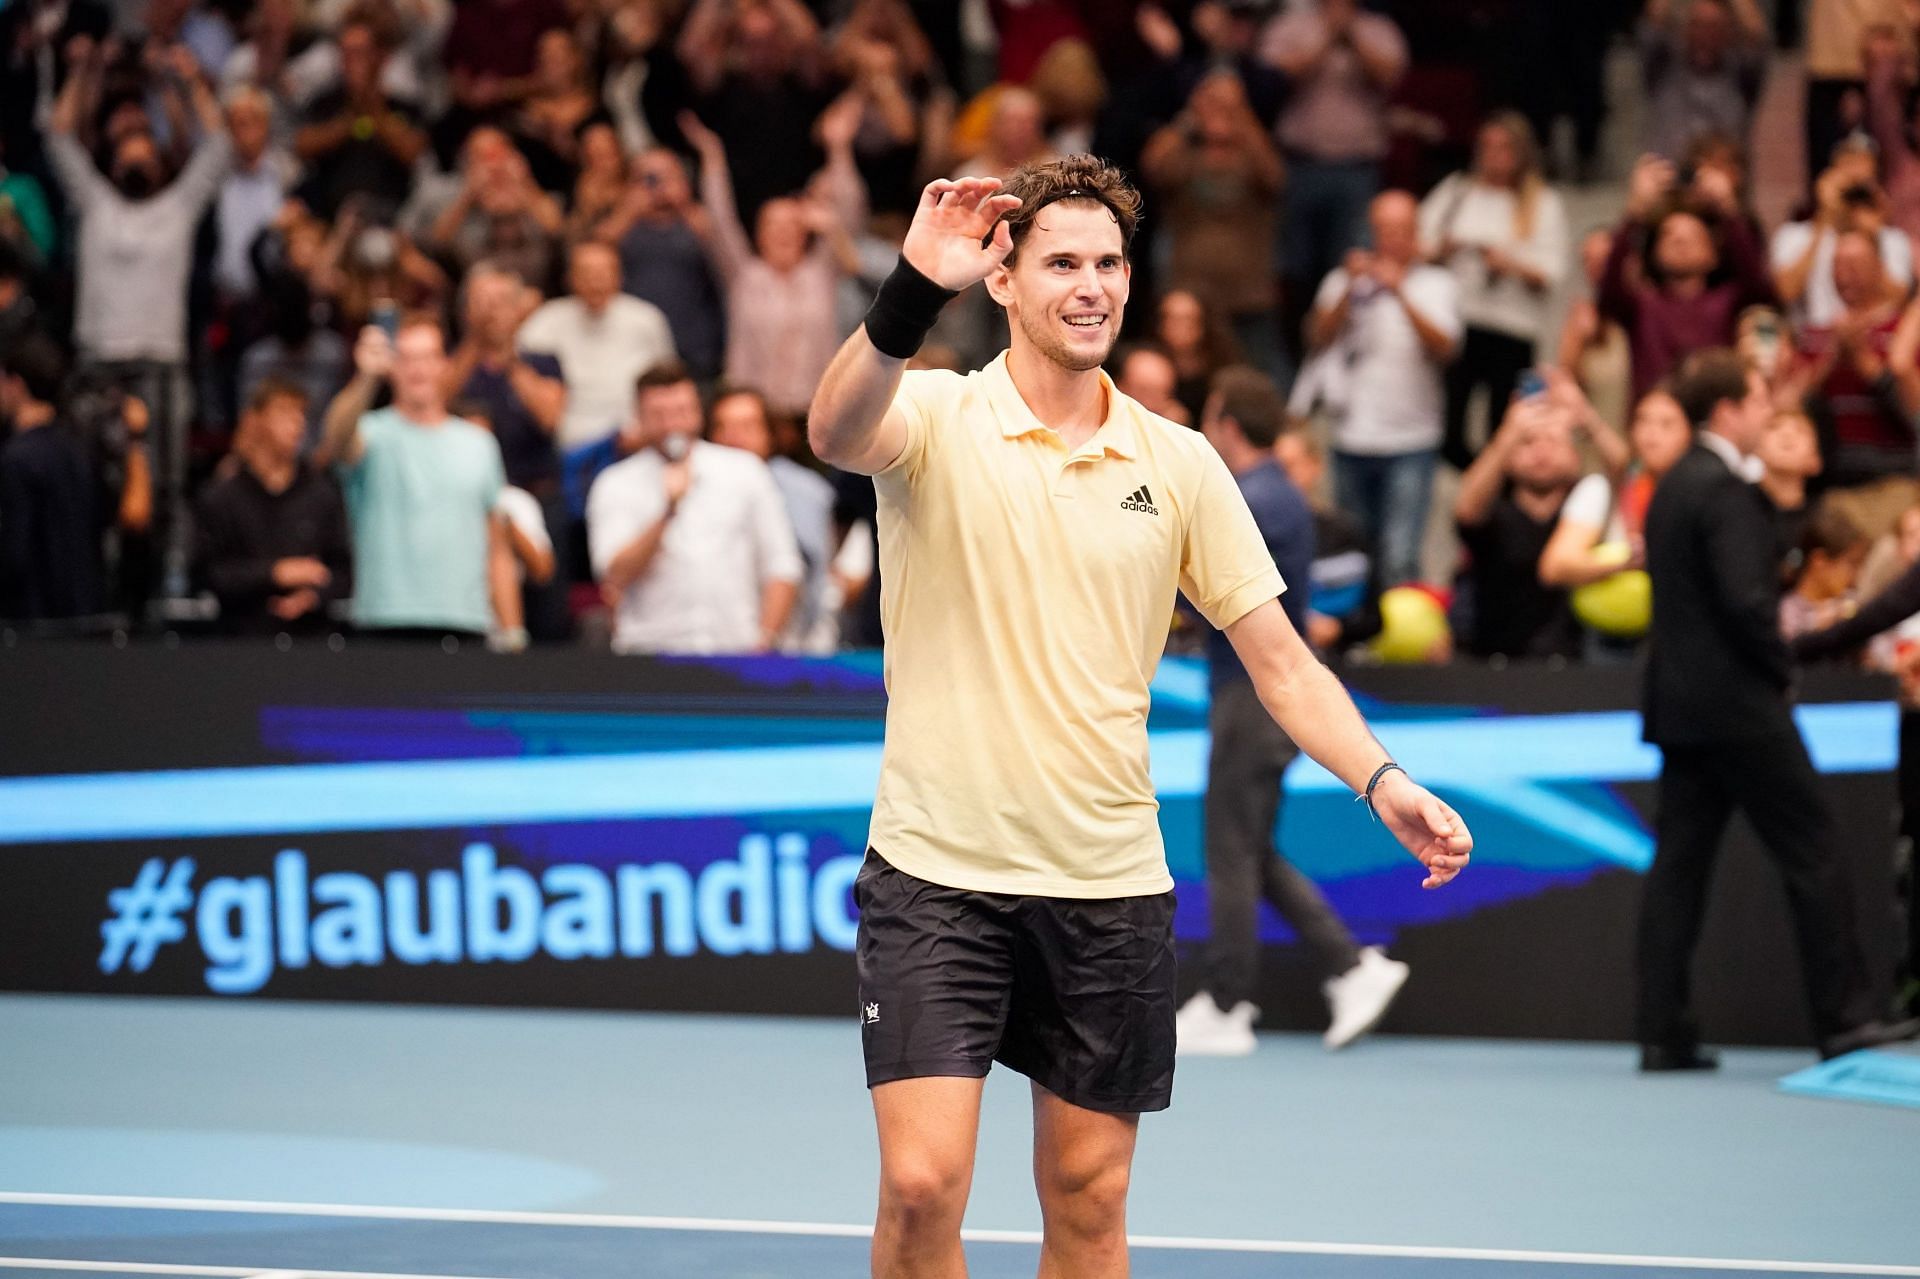 Dominic Thiem waves to the crowd after his first-round victory over Tommy Paul in the Vienna Open. (Photo courtesy of Bildagentur Zolles of the Erste Bank Open 2022)